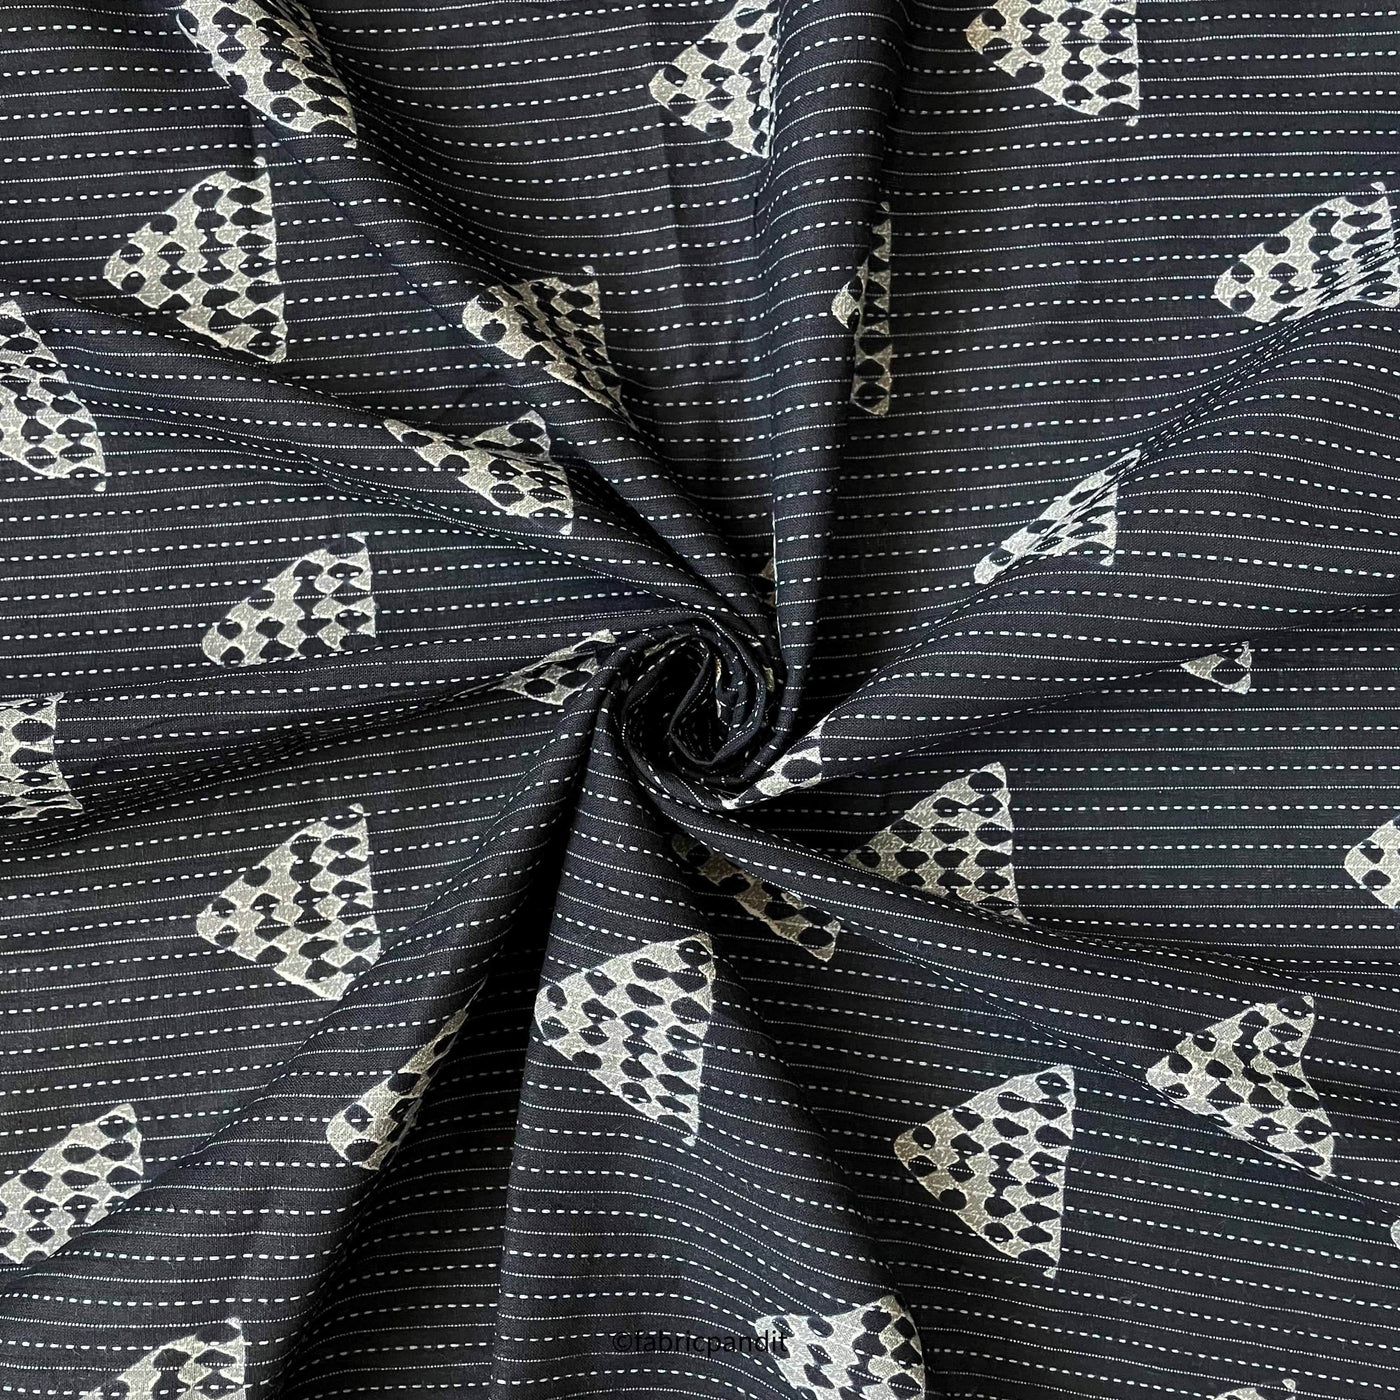 Fabric Pandit Fabric Black & Grey Abstract Triangles Woven Kantha Hand Block Printed Pure Cotton Fabric (Width 42 inches)